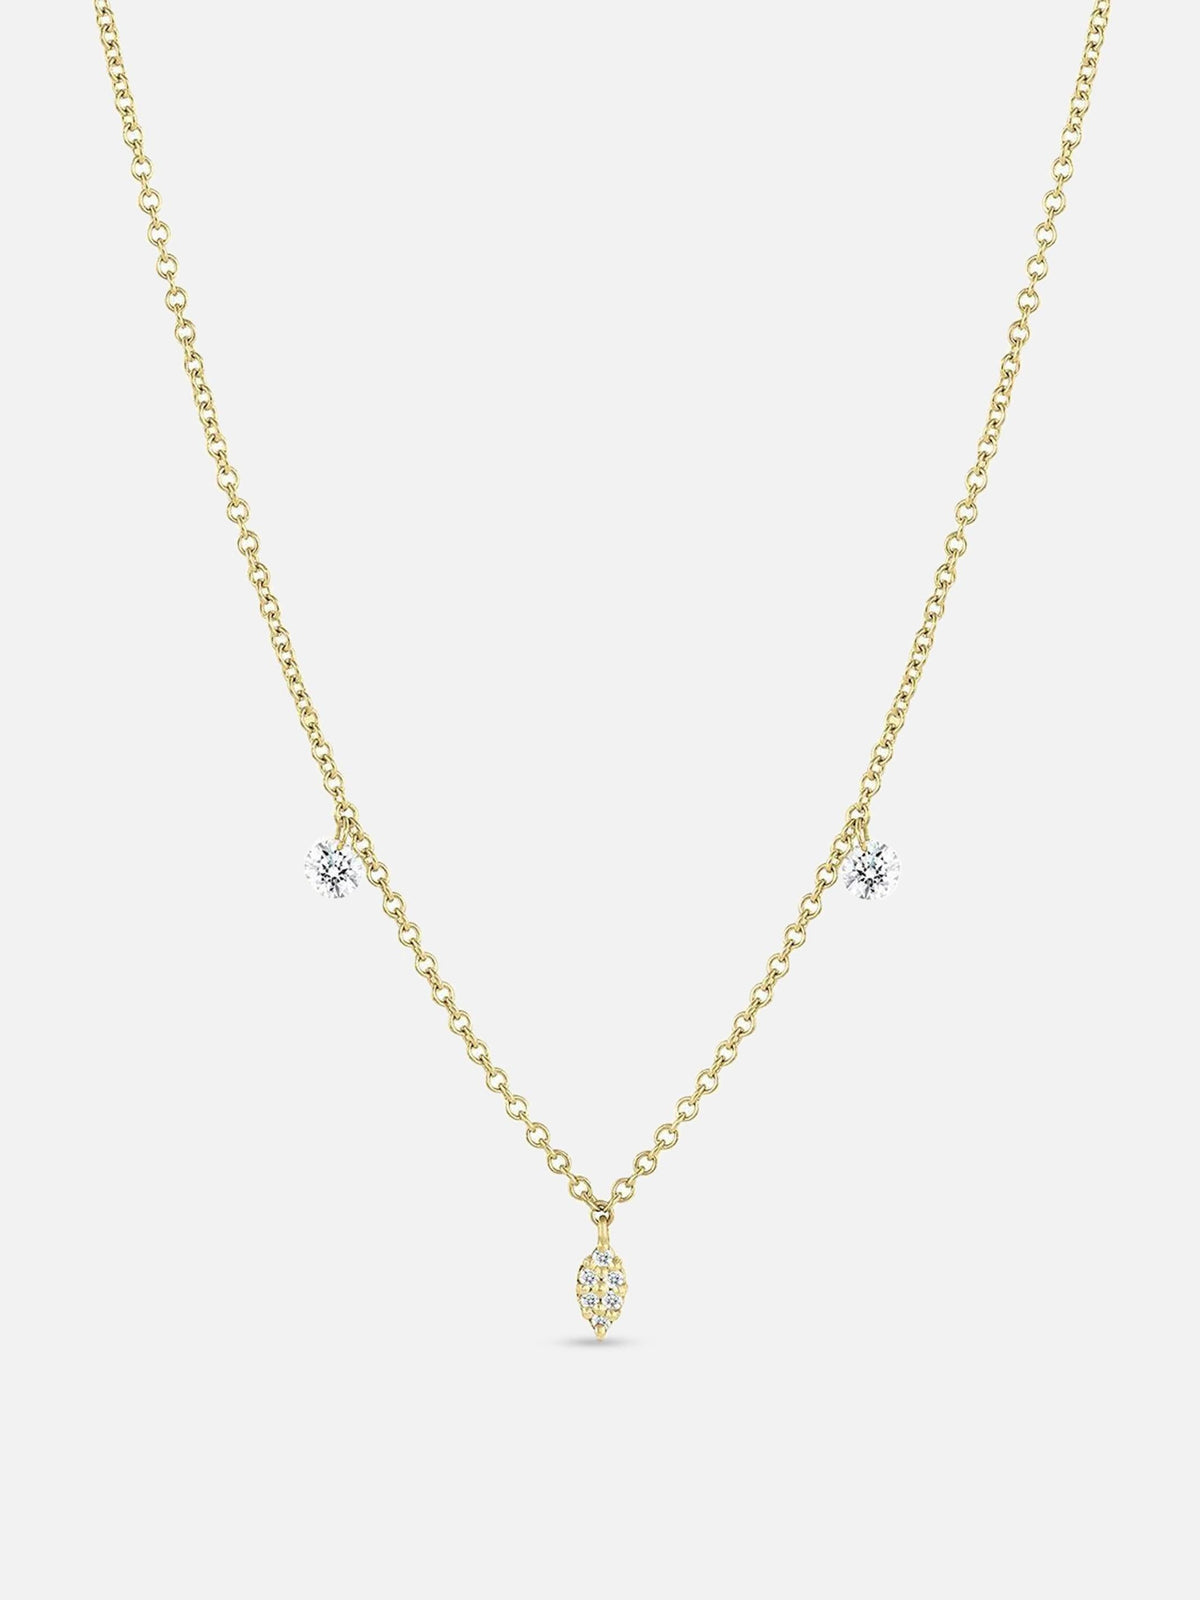 Meredith Young Floating Diamond Charm Necklace 1